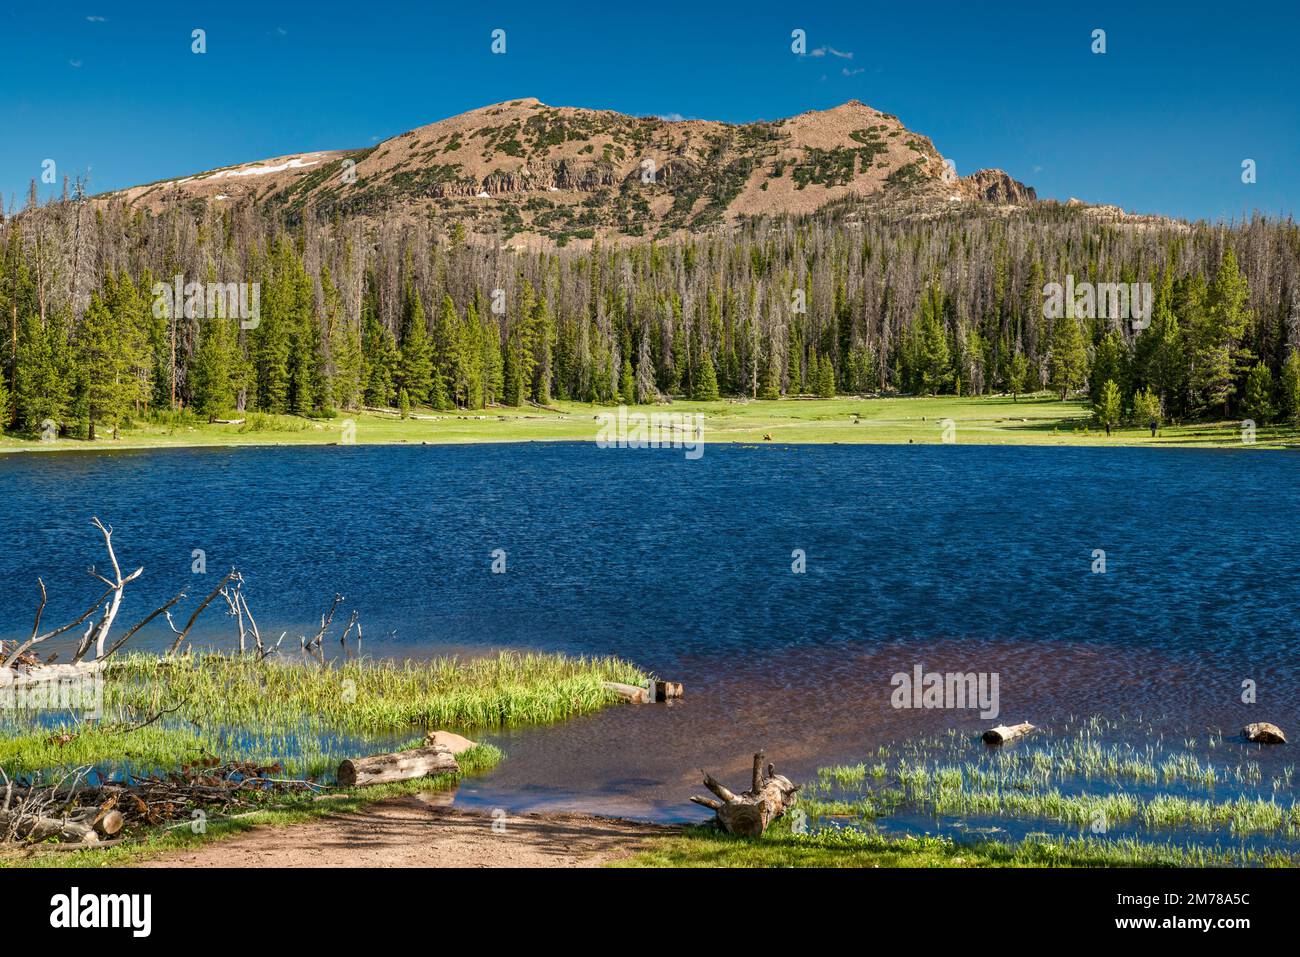 Lilly Lake, Notch Mountain, Mirror Lake Scenic Byway, Uinta Mountains, Uinta Wasatch cache National Forest, Utah, USA Foto Stock